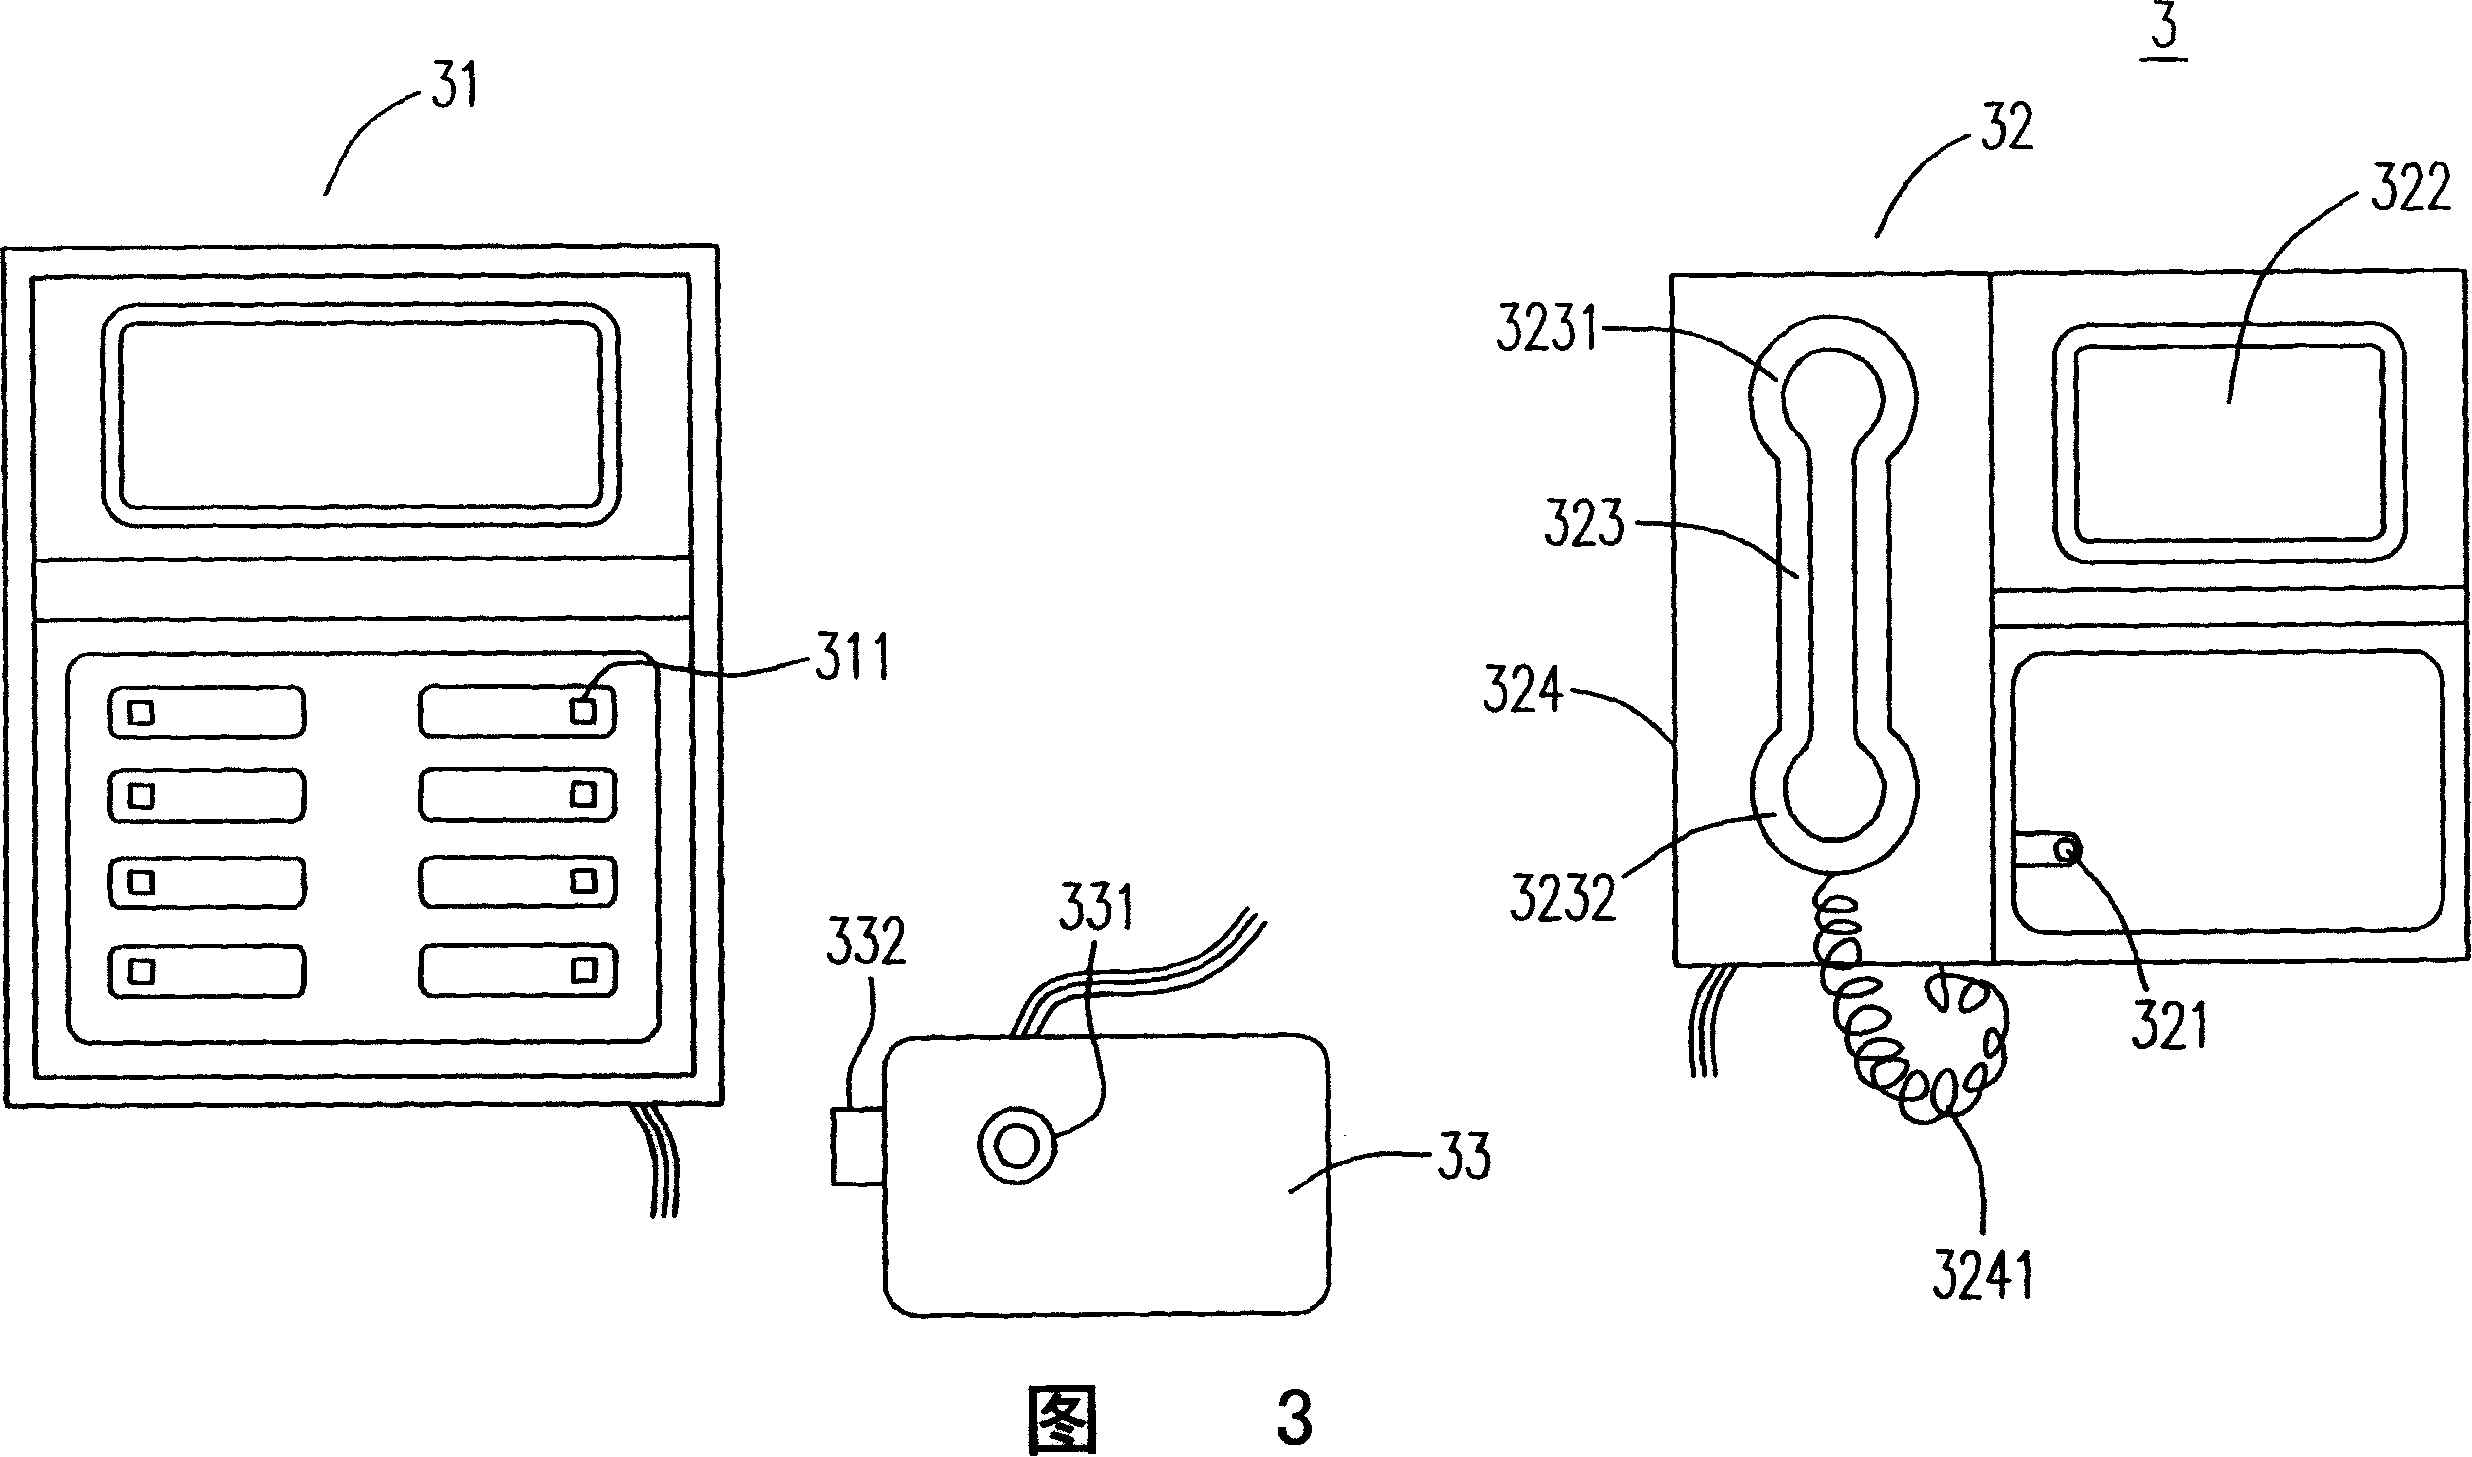 Monitoring system having AC/DC self-support power supply equipment and interphone system